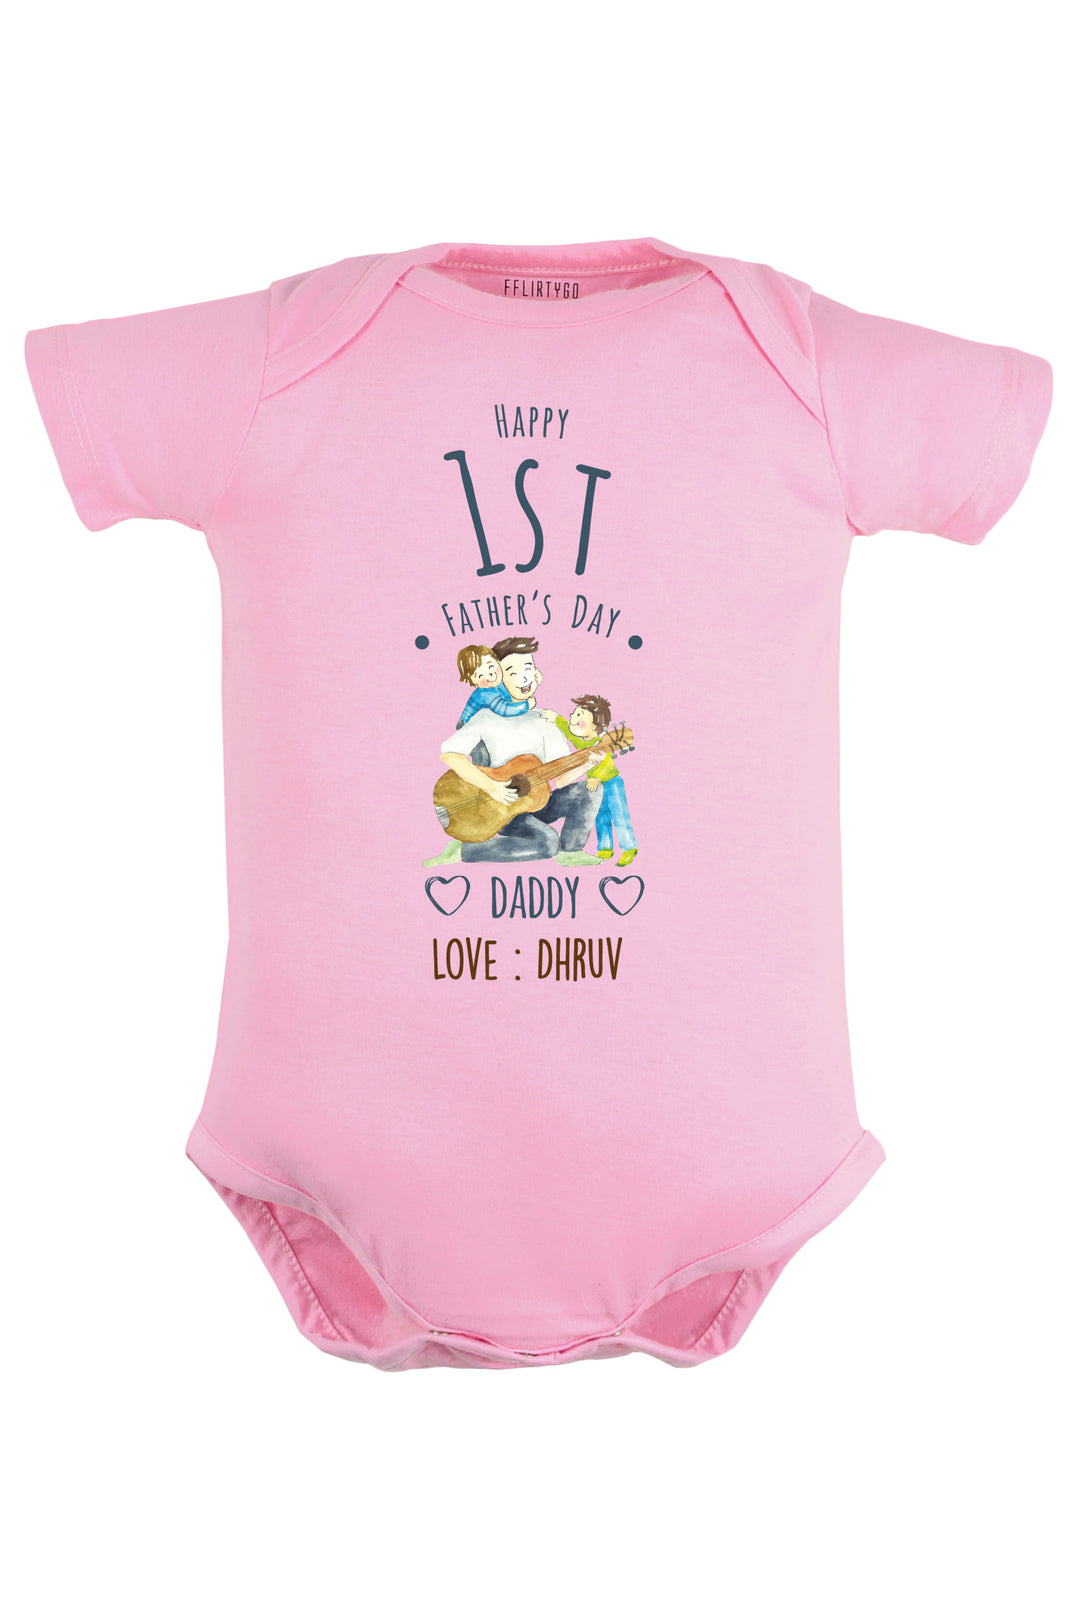 Happy 1st Father's Day Daddy Baby Romper | Onesies w/ Custom Name